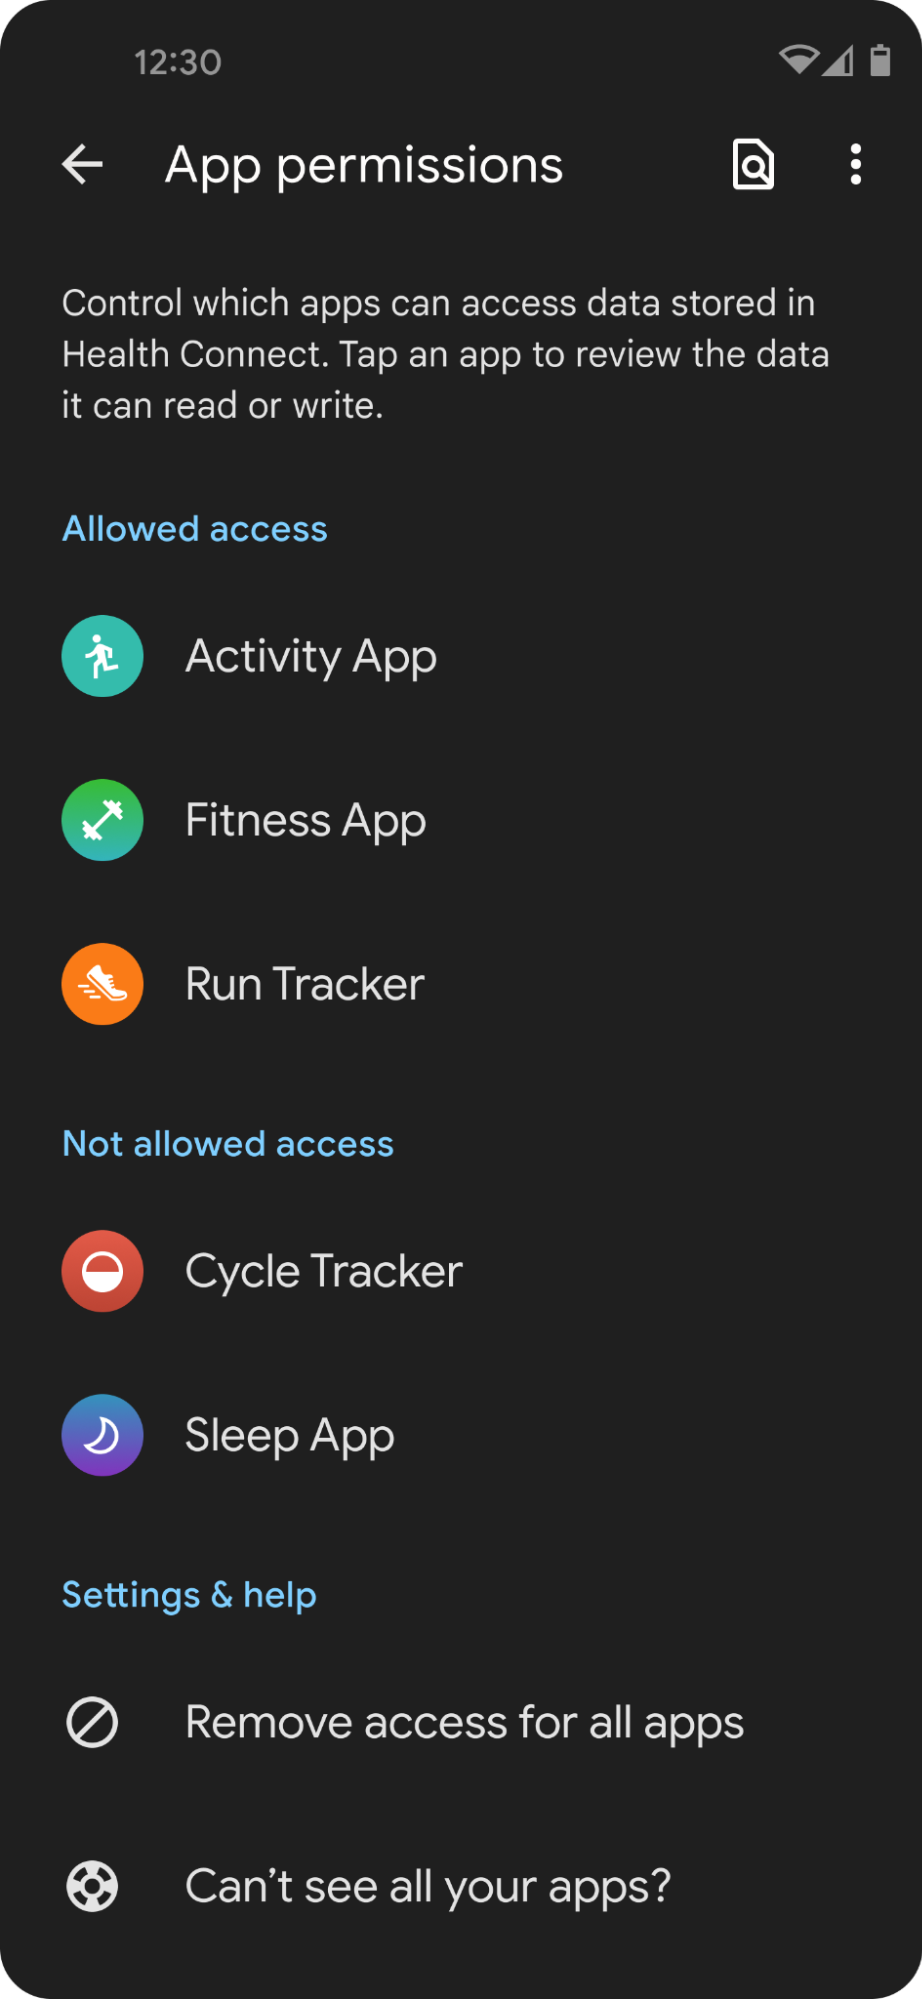 Phone screen showing App permissions for all apps that can access data stored in Health Connect